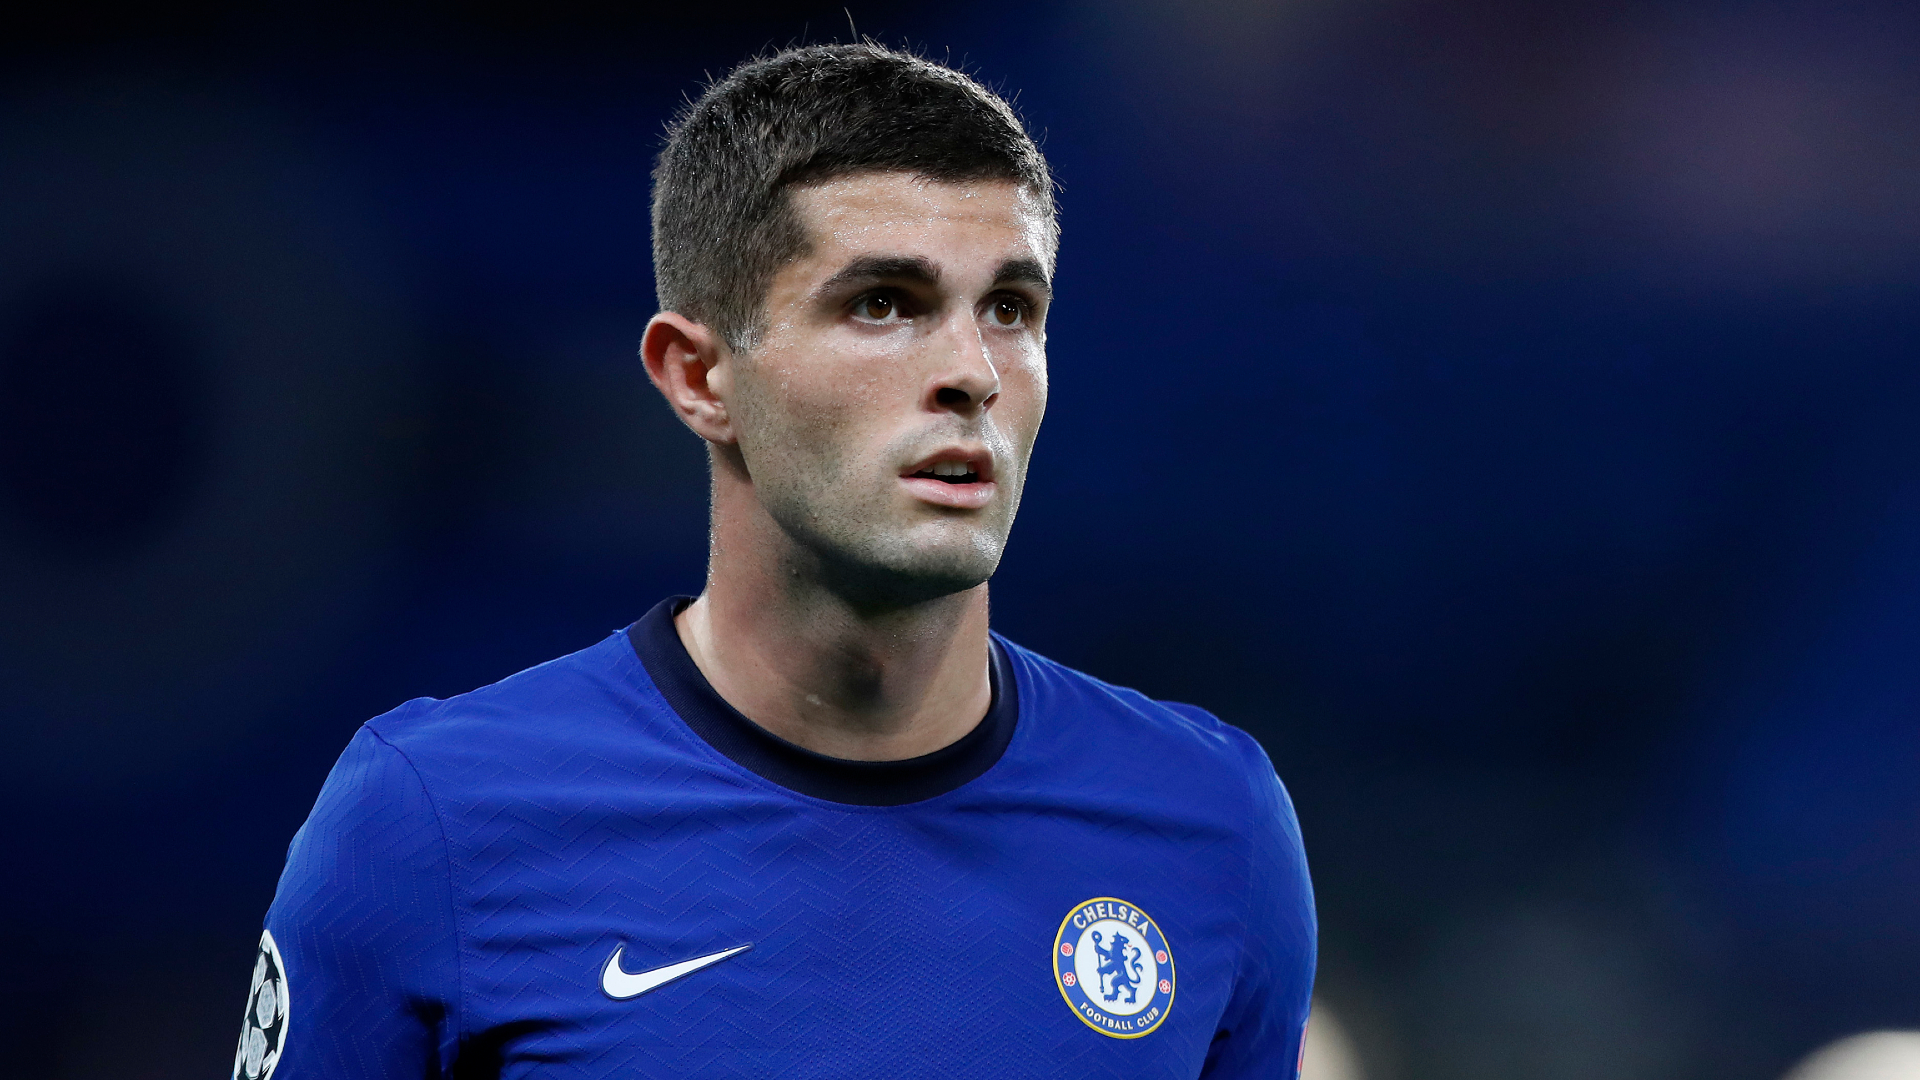 'I don't really like attention!' - Chelsea star Pulisic claims he's